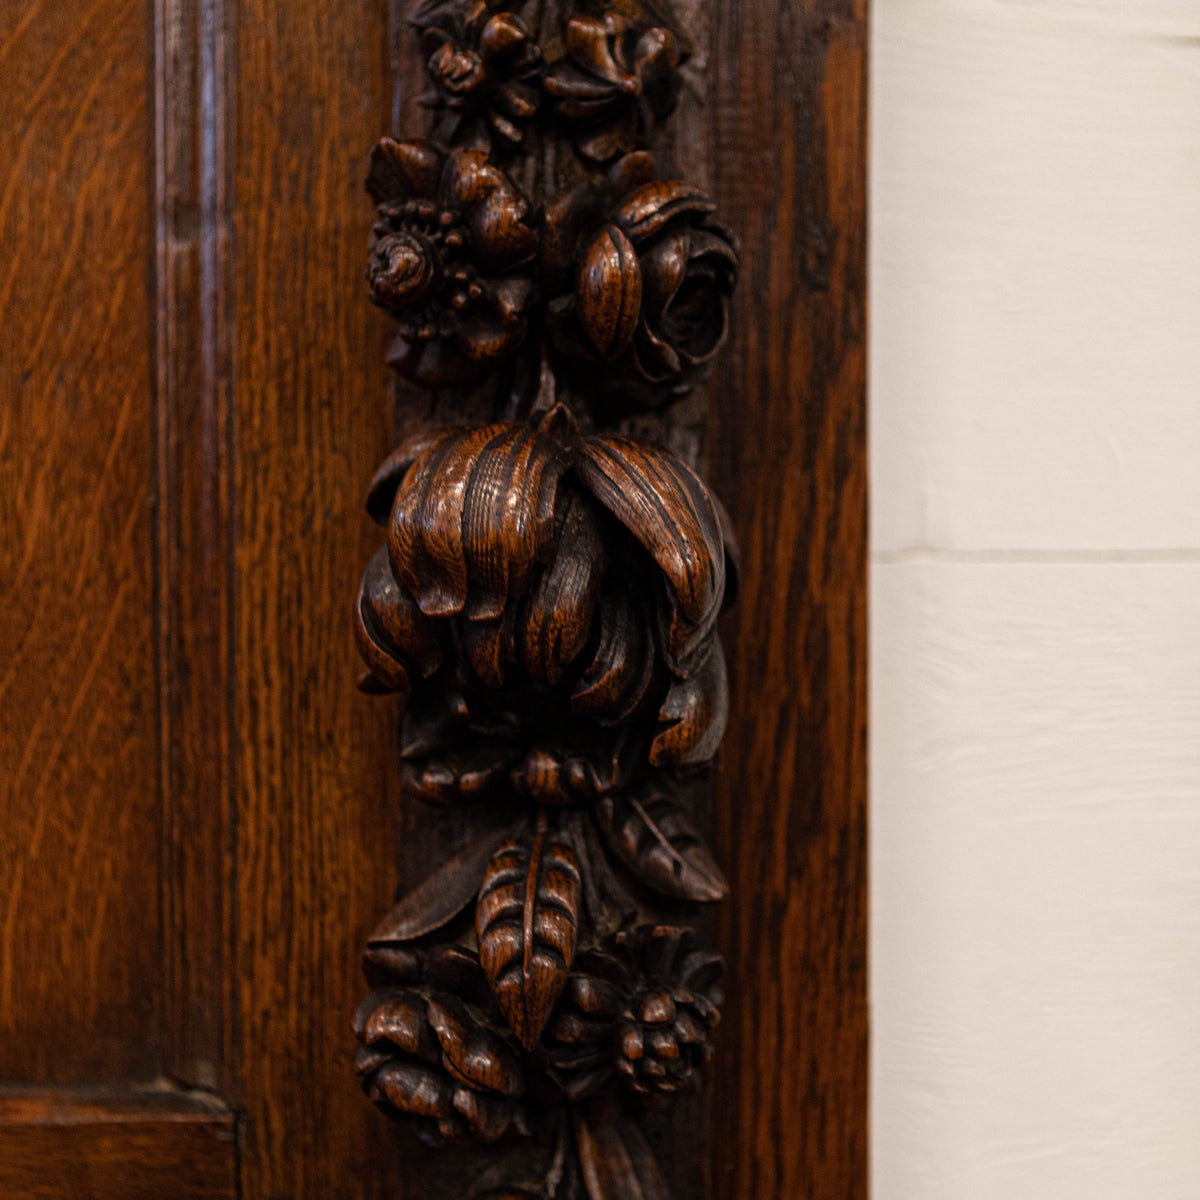 Antique Heavily Carved Oak Wooden Element | Overmantle | The Architectural Forum